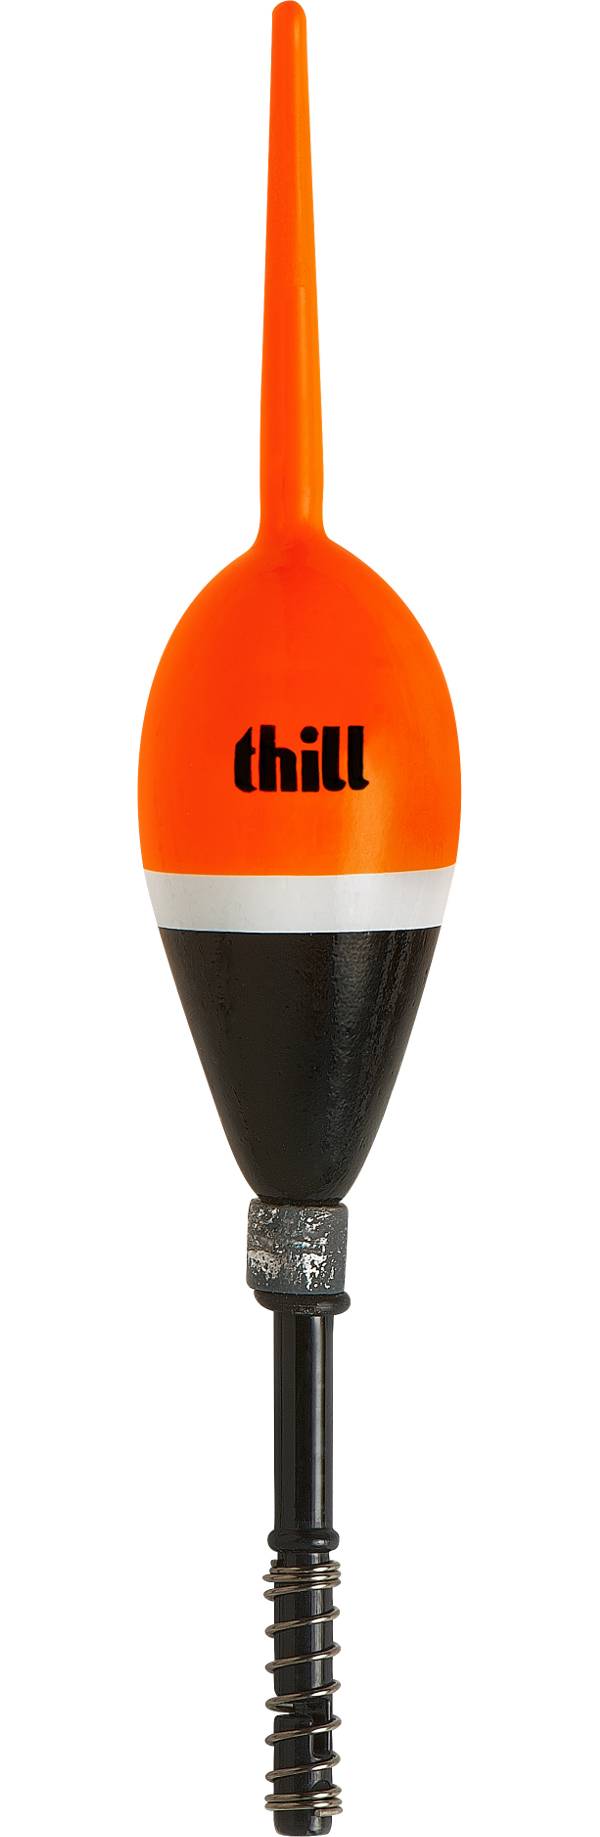 Thill Premium Weighted Spring Floats product image